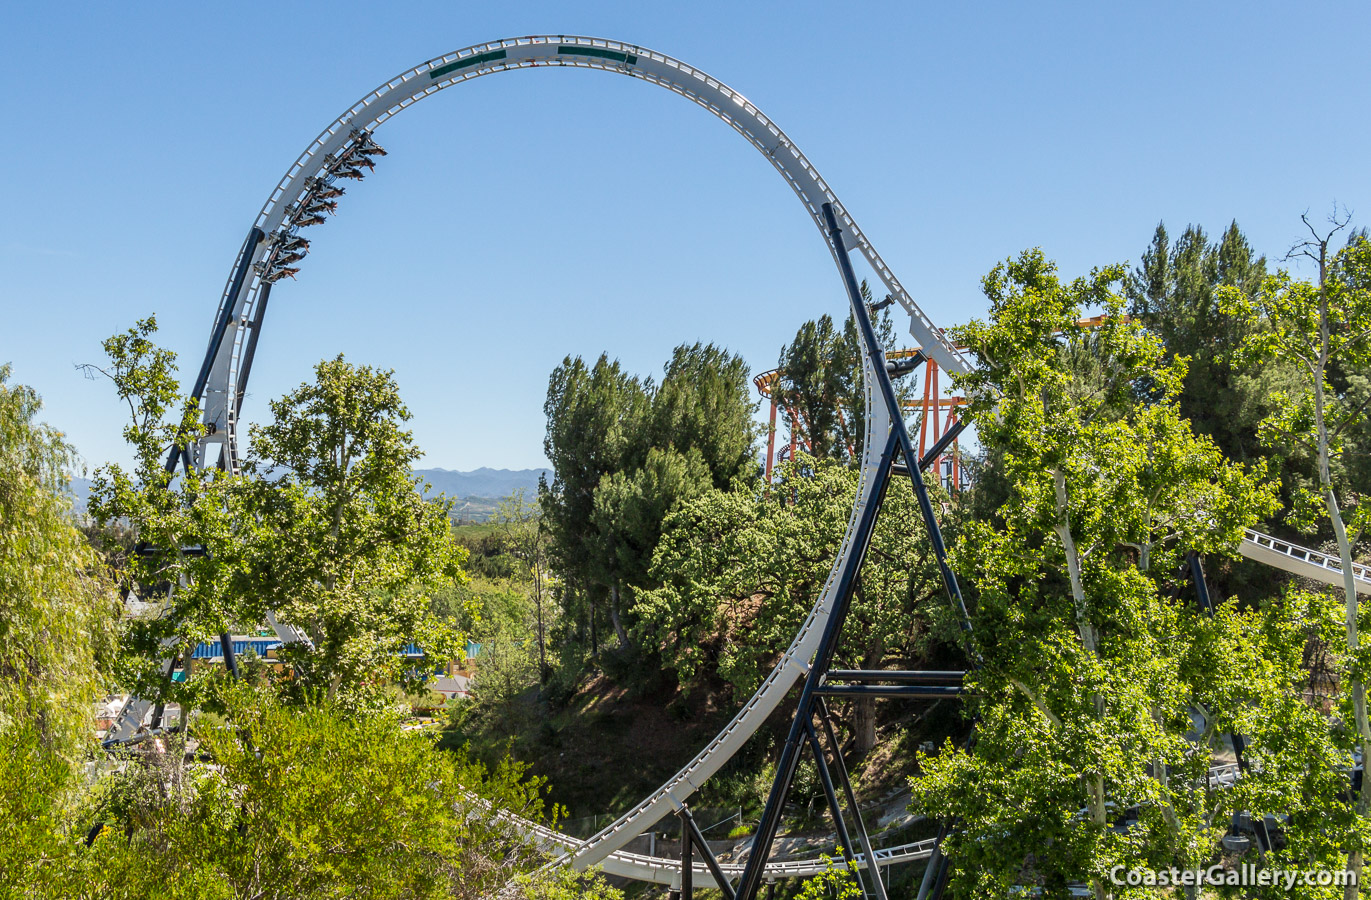 Log Jammer at Six Flags Magic Mountain was replaced by Full Throttle